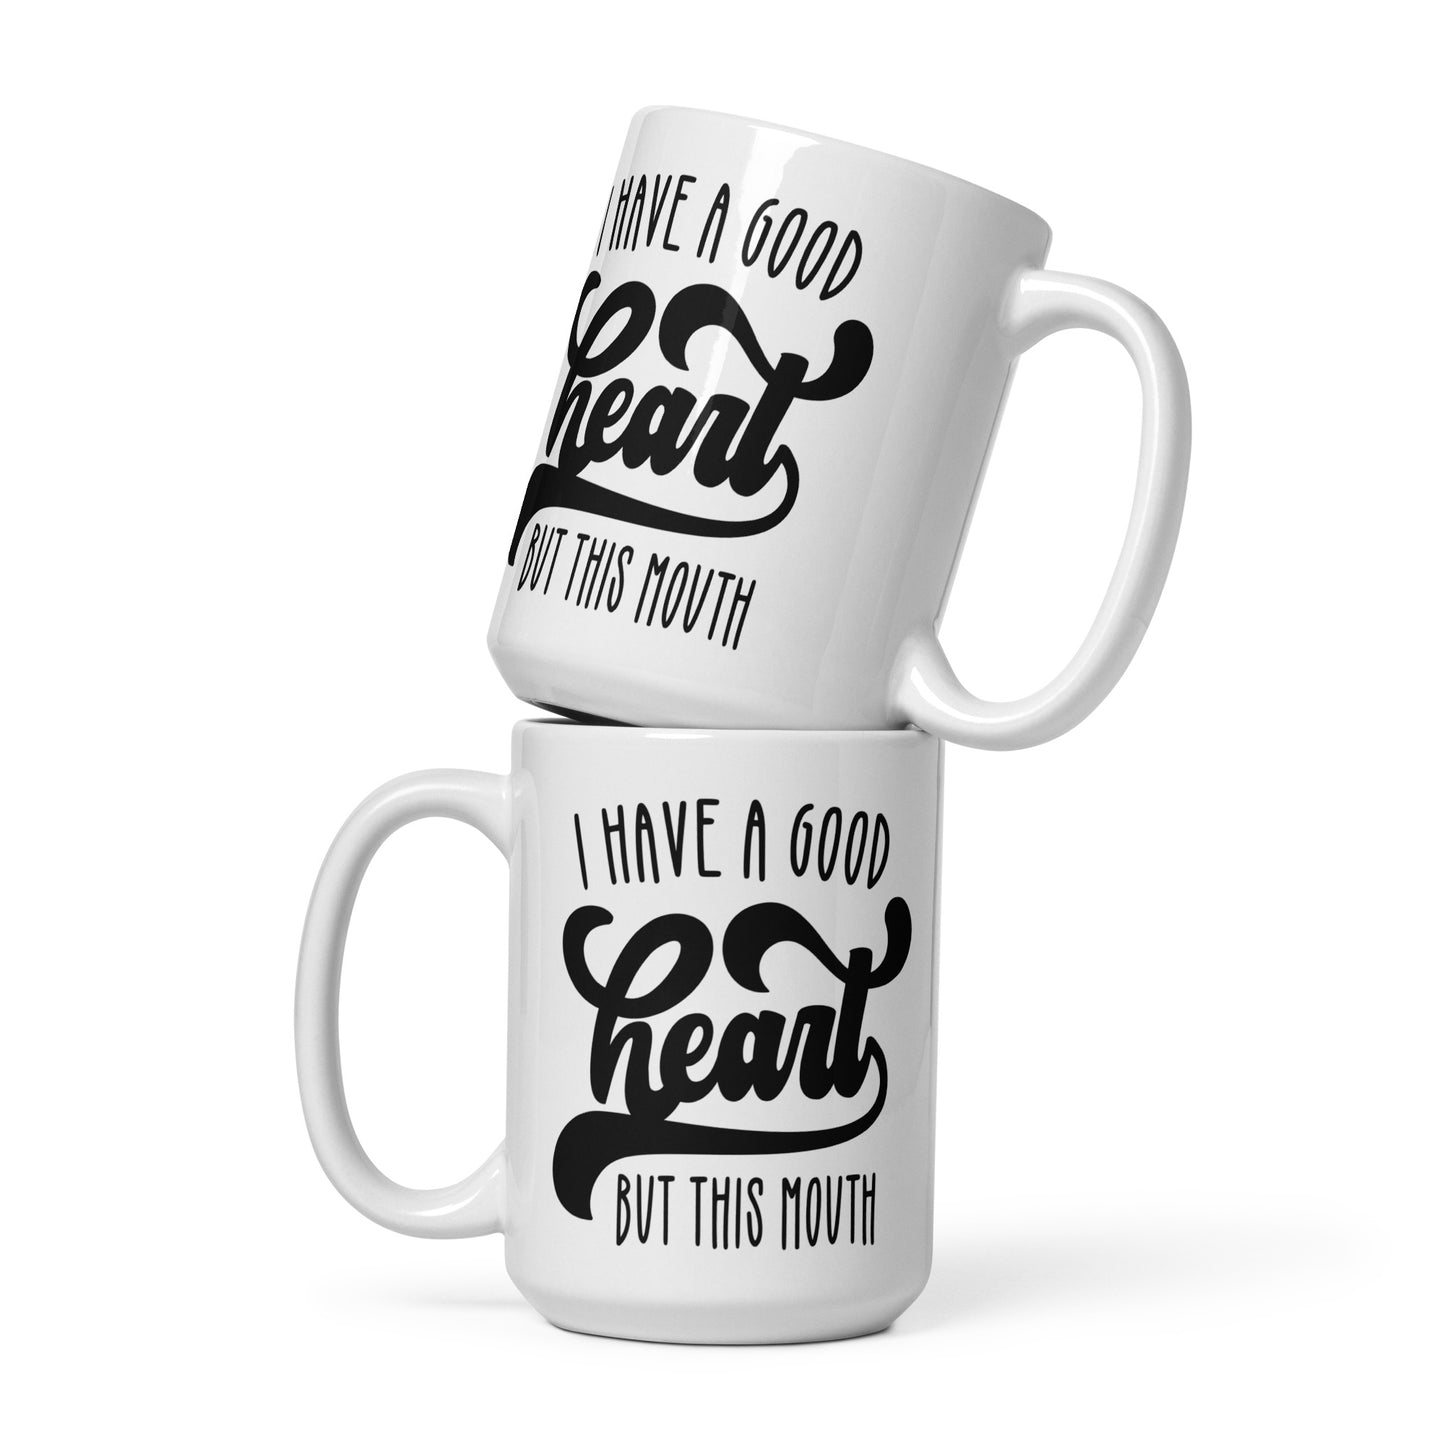 I have a Good Heart but this Mouth White glossy mug CedarHill Country Market